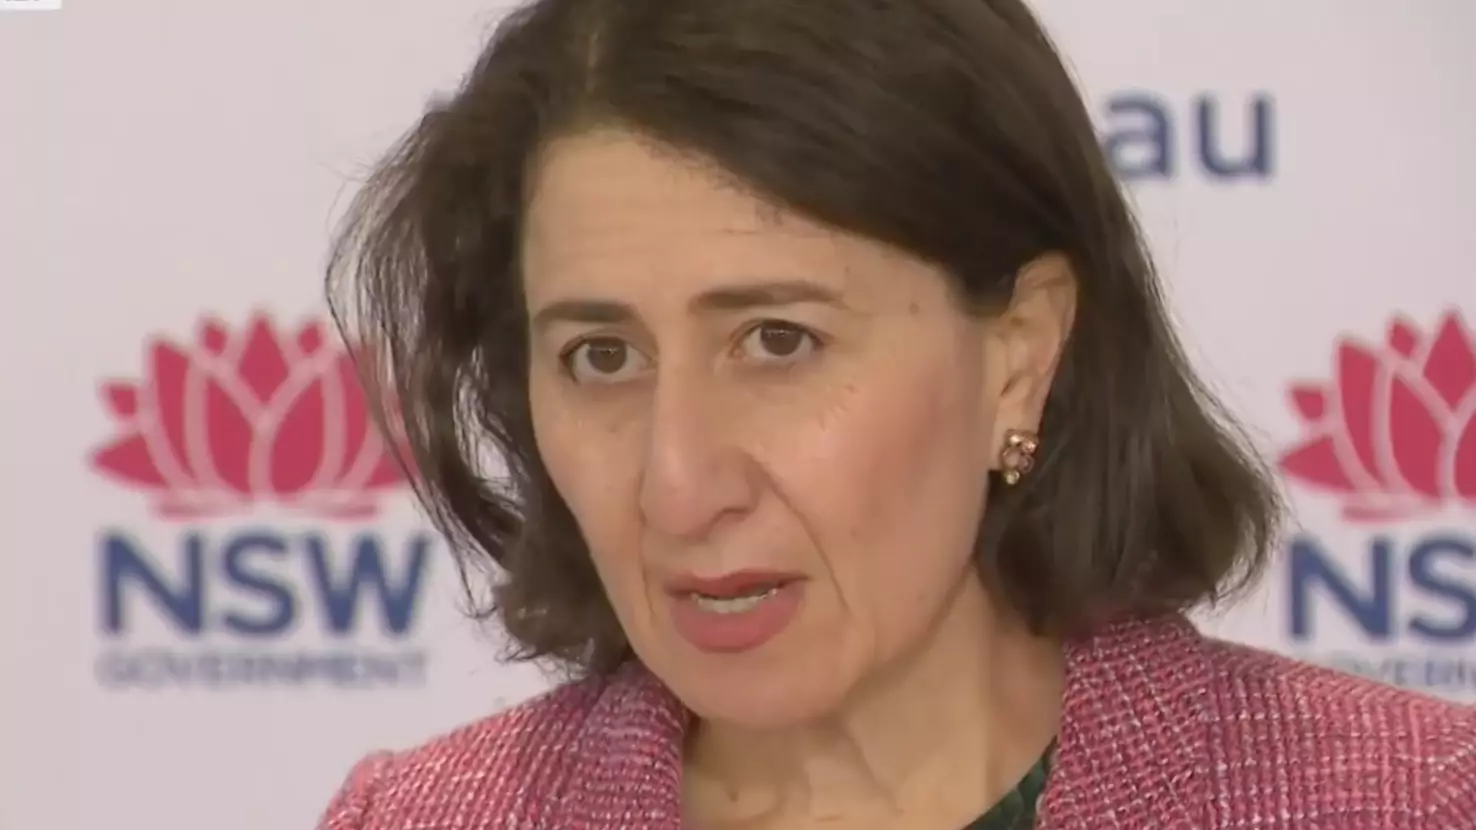 NSW Premier Says It Will Be 'Near Impossible' To Bring Covid-19 Cases Back To Zero